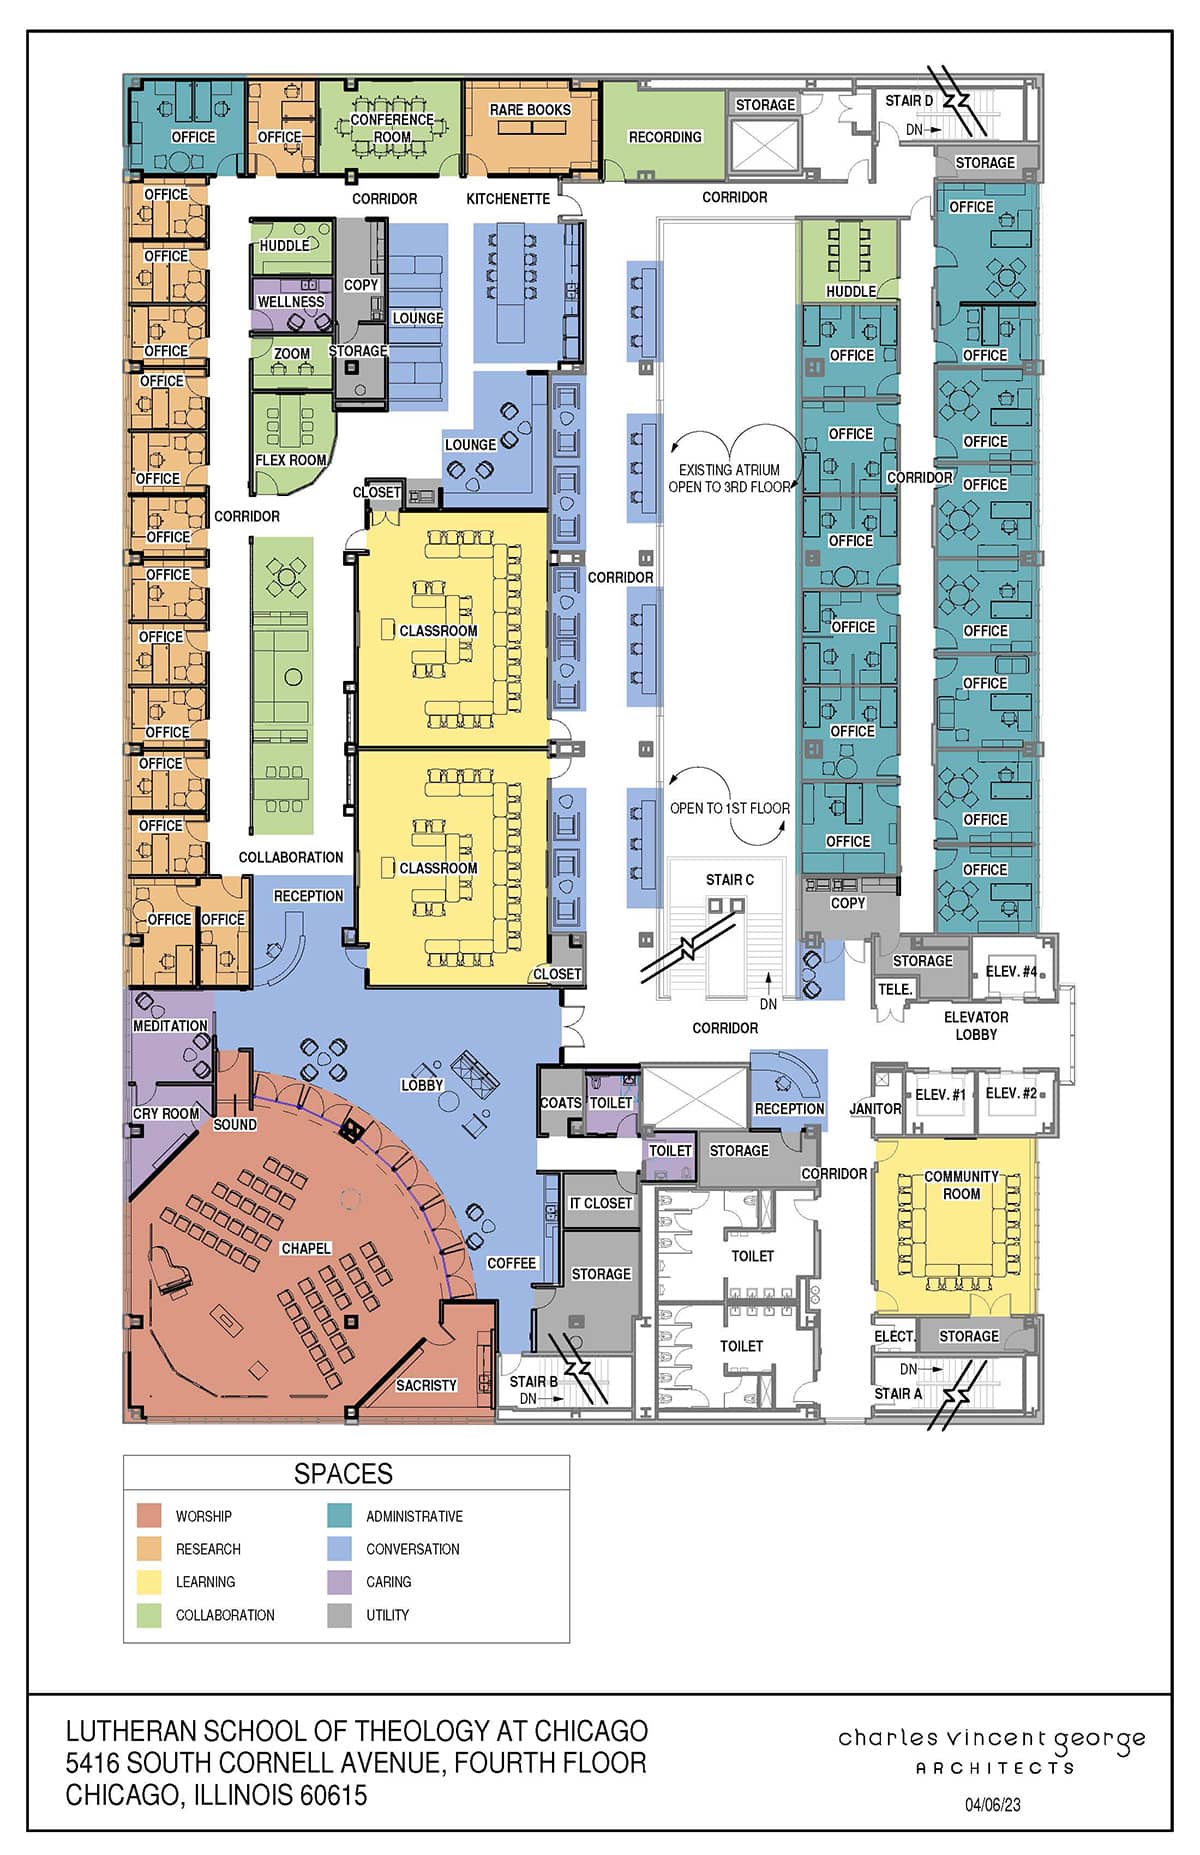 A floorplan of LSTC's new space. The floorplan is color-coded into spaces for different uses: worship, research, learning, collaboration, administrative, conversation, caring, and utility.